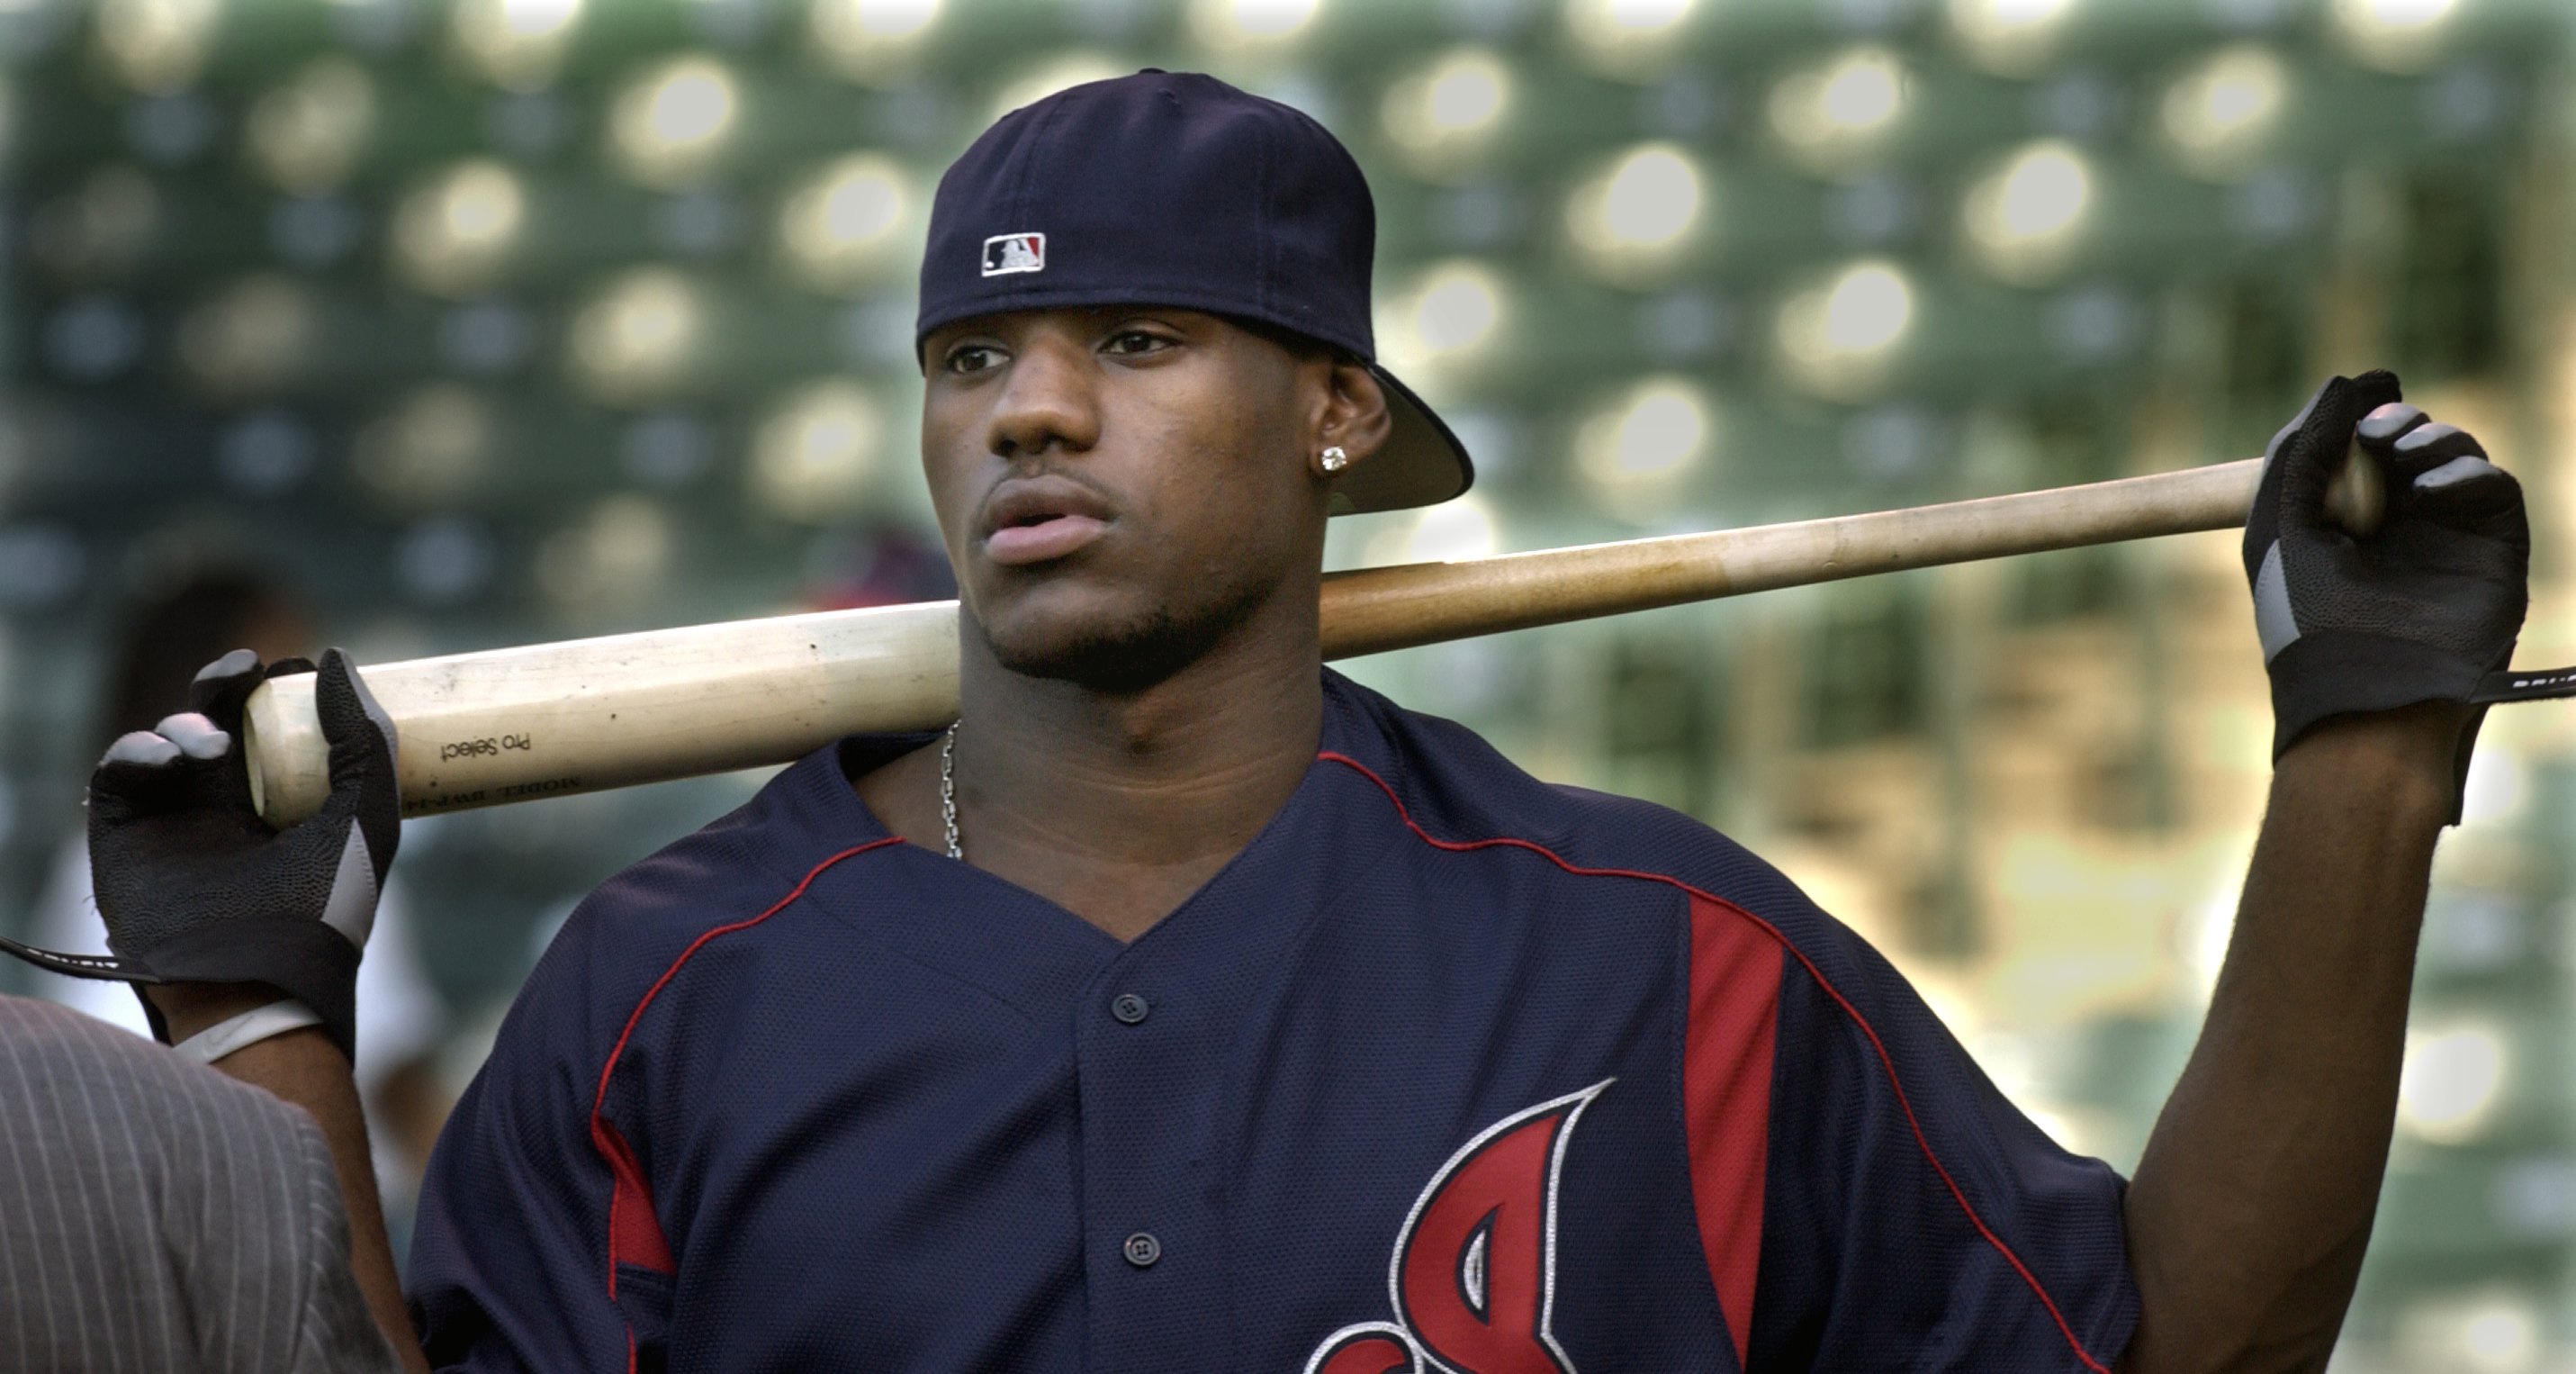 LeBron James, the Cavs #1 pick this year, gets ready to hit batting practice before the Cincinnati Reds-Cleveland Indians game on Friday night.  Shot at Jacobs Field.  Shot on June 27, 2003.  (Chuck Crow/The Plain Dealer) 